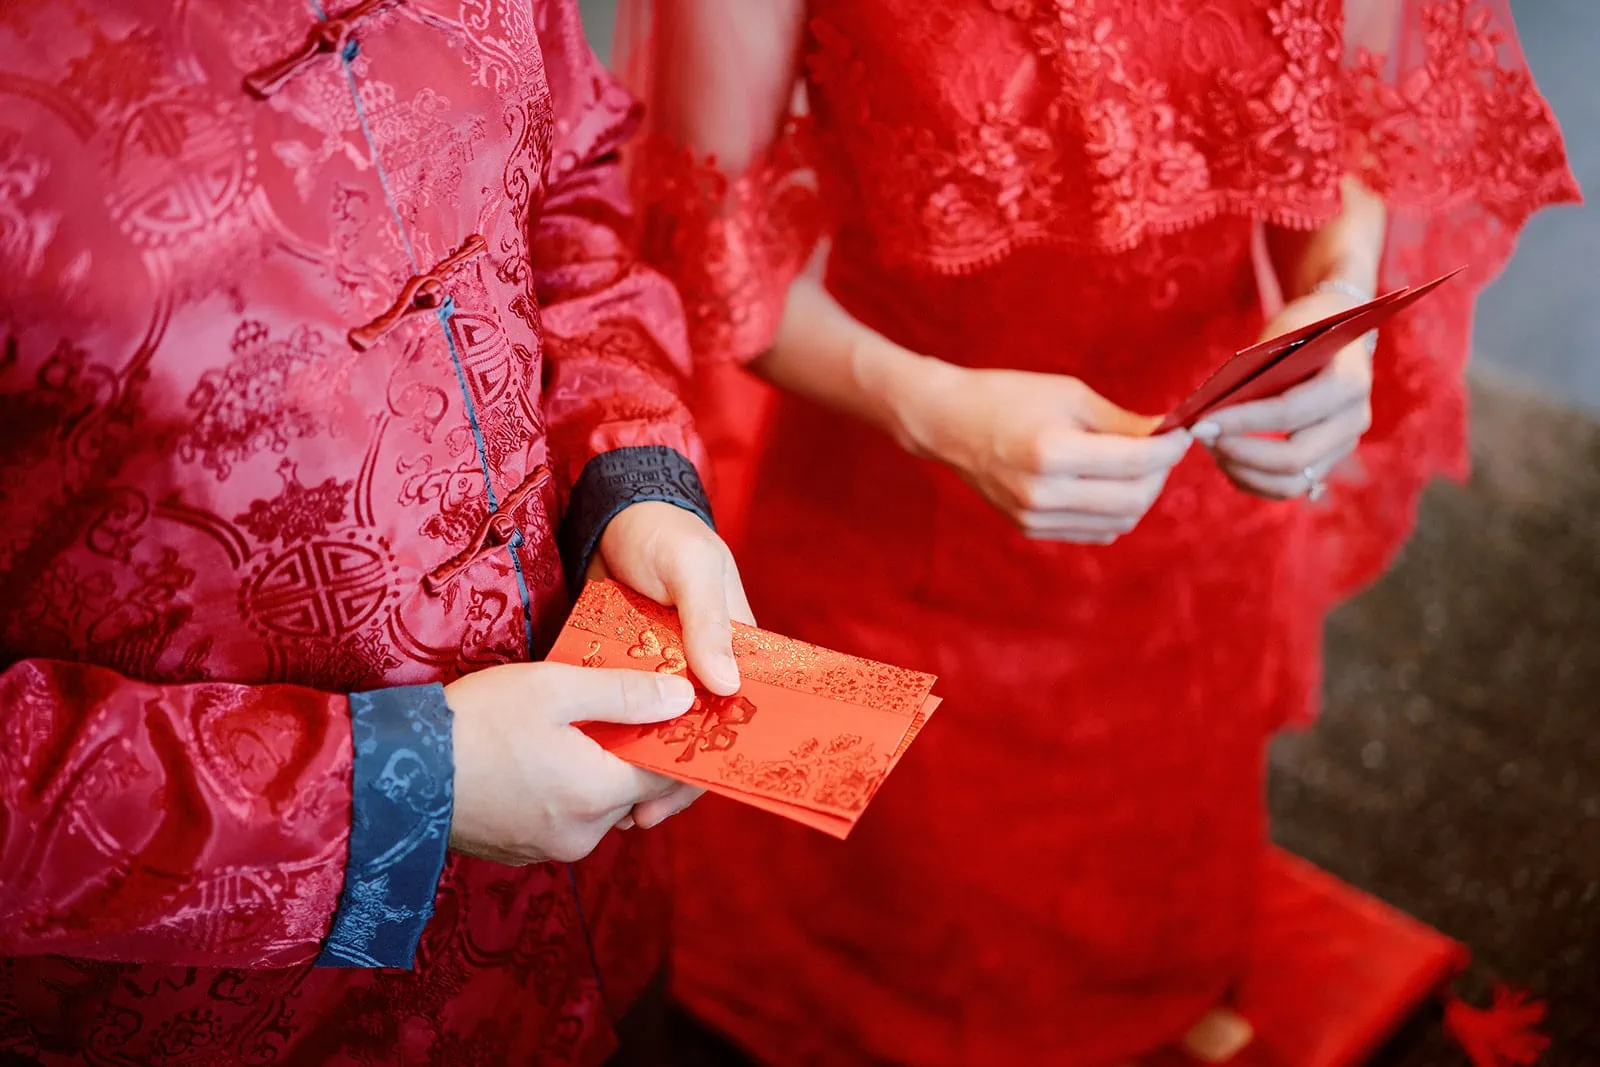 Queenstown New Zealand Elopement Wedding Photographer - A man and woman in red Chinese outfits celebrating their ultimate Queenstown elopement with red envelopes.